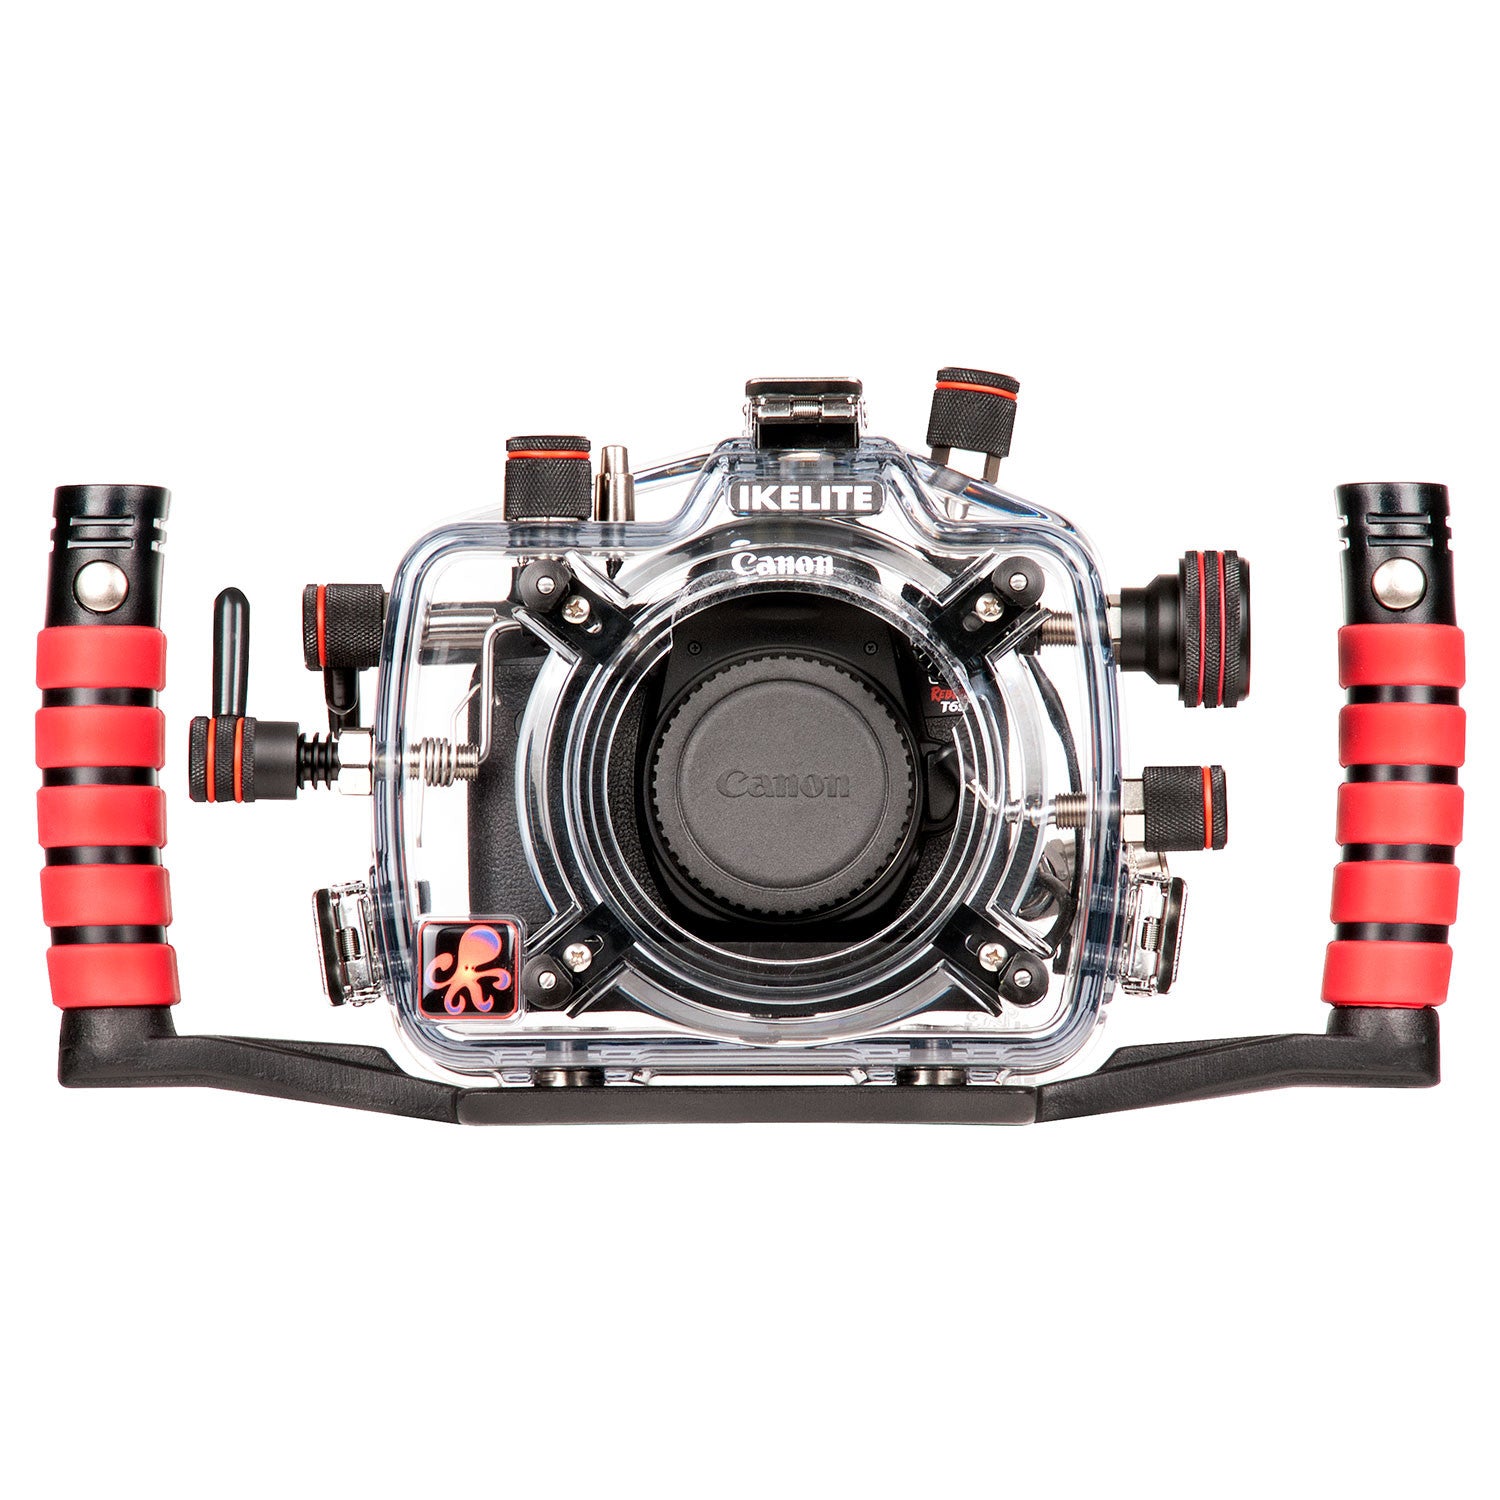 Underwater Housing for Canon EOS 760D, Rebel T6s